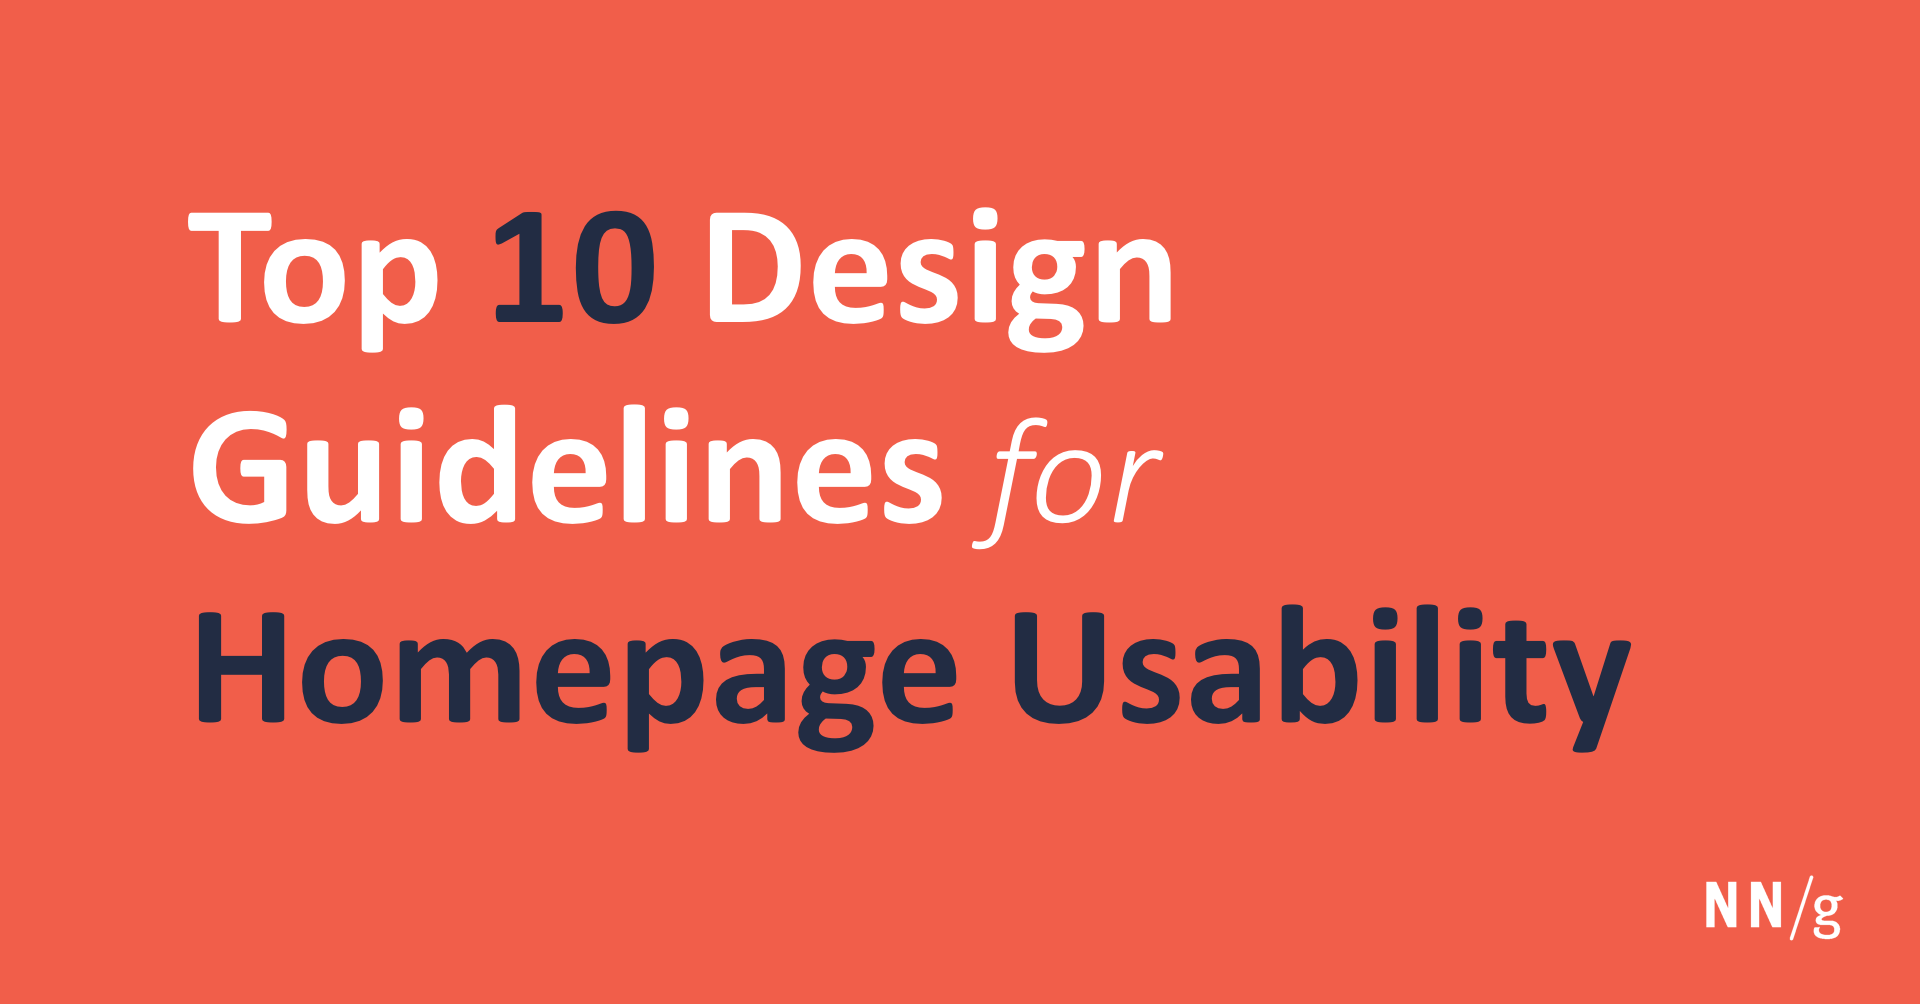 Top 10 Guidelines for Homepage Usability, Vectribe